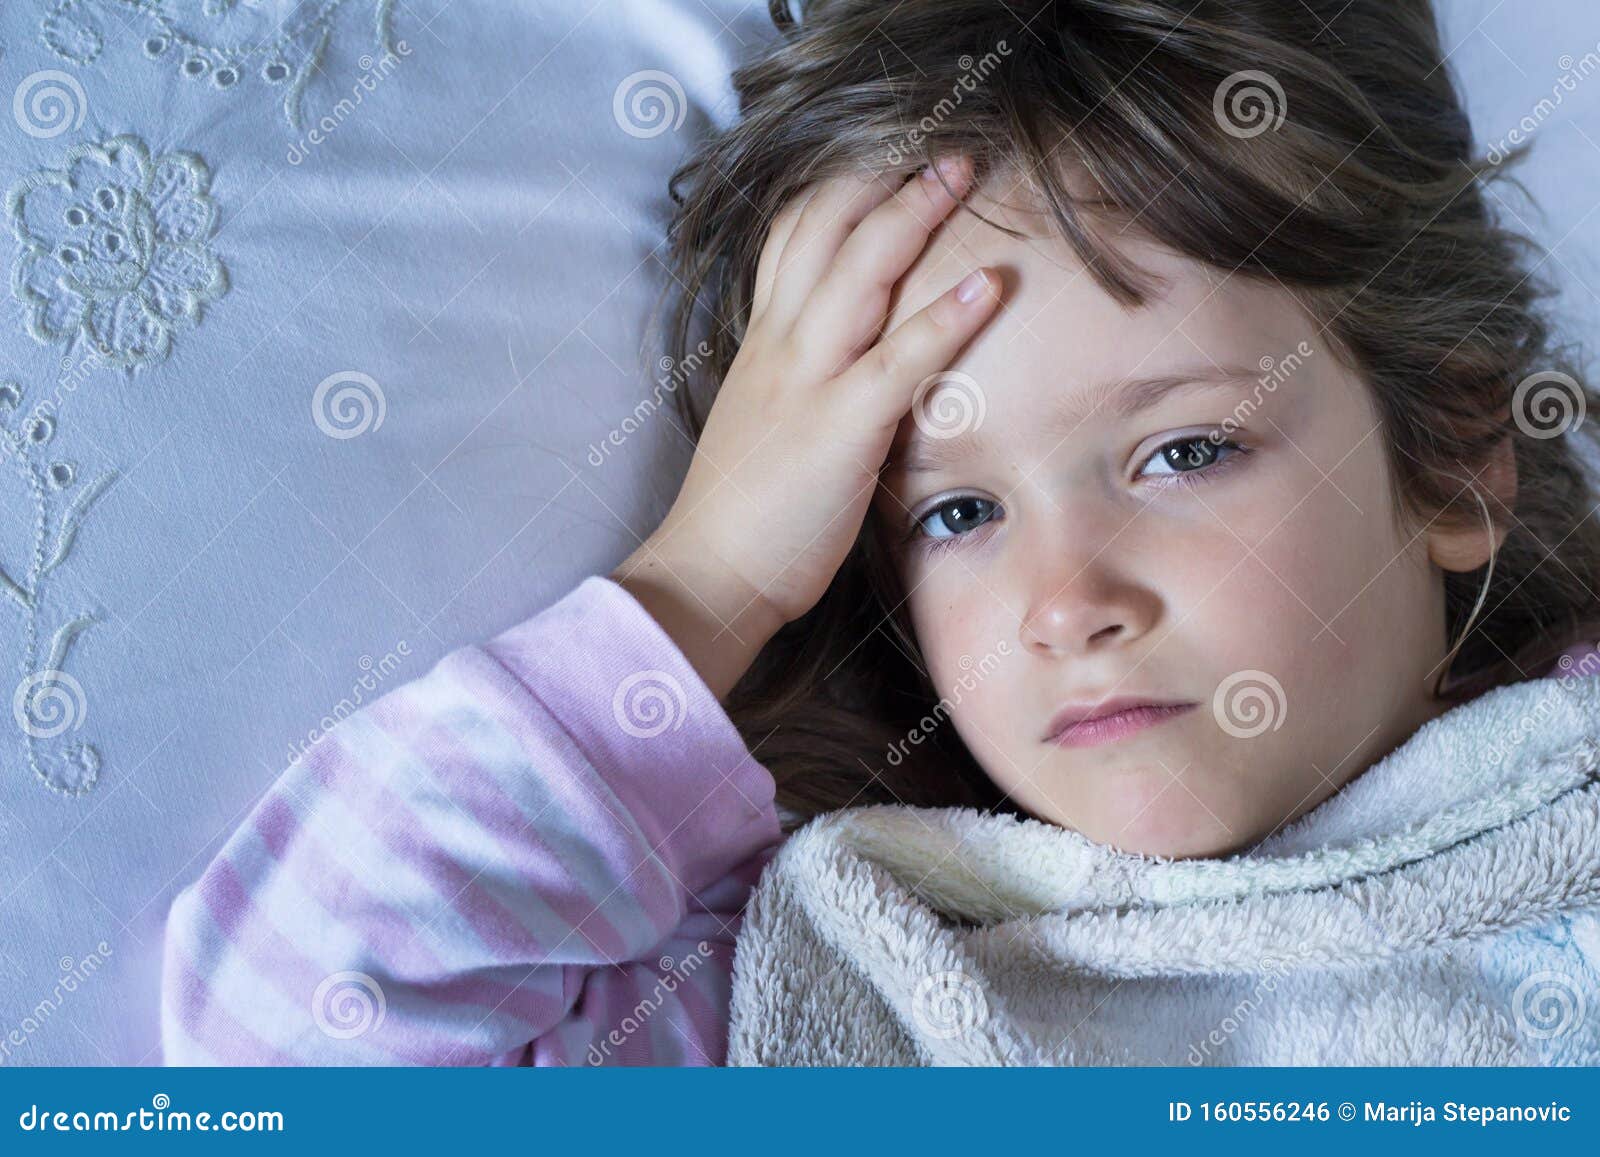 Exhausted Child Lying in Bed, Feeling Sick. Healthcare and Medical ...